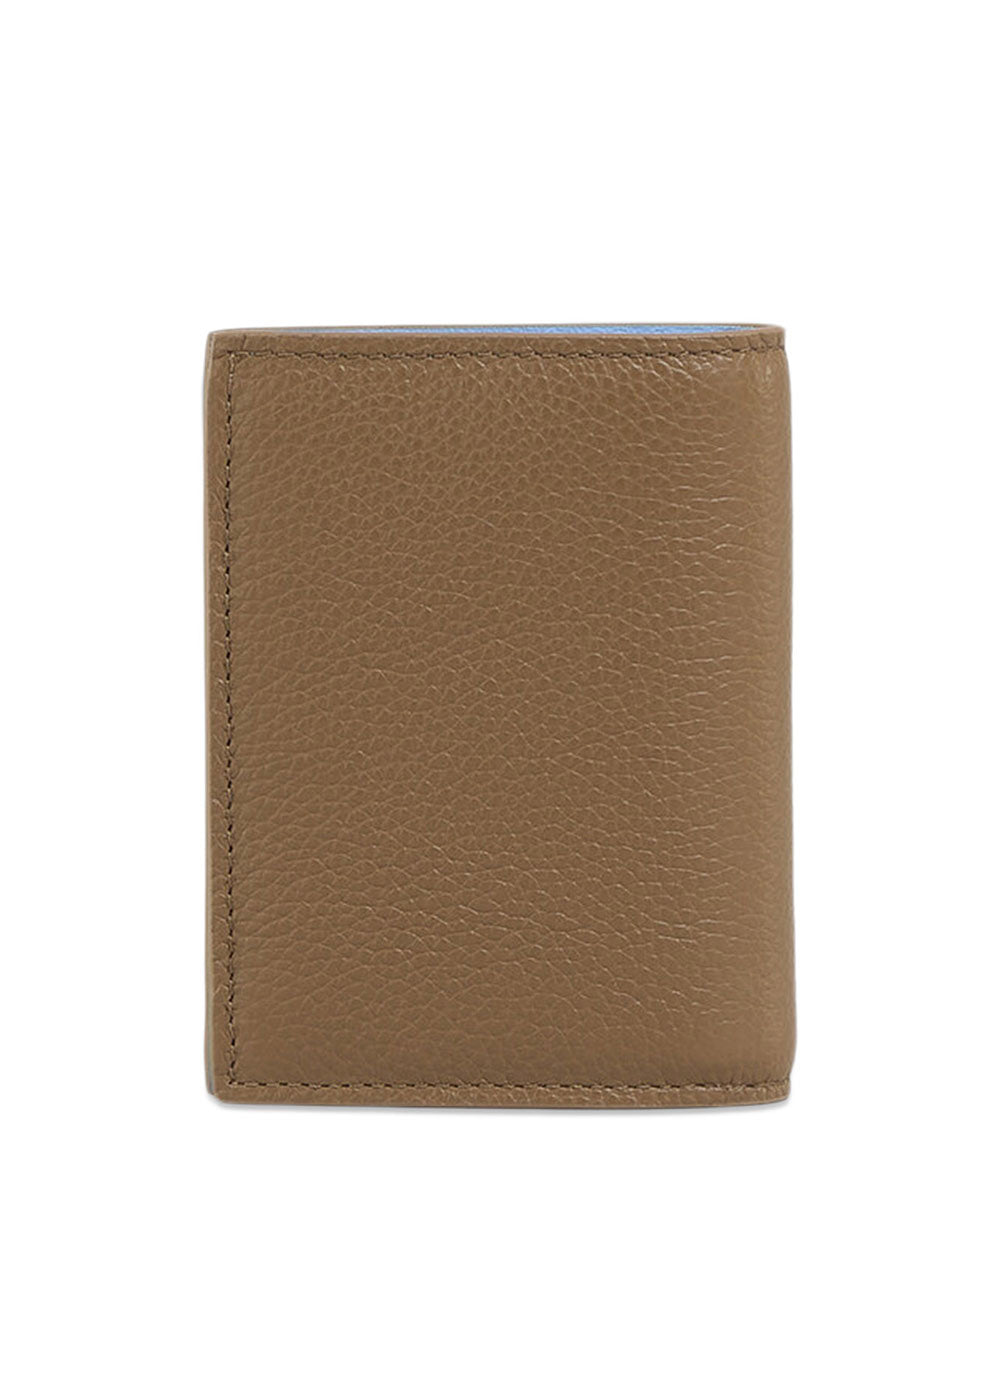 LEATHER BIFOLD WALLET WITH MARNI MENDING - Brown/Blue